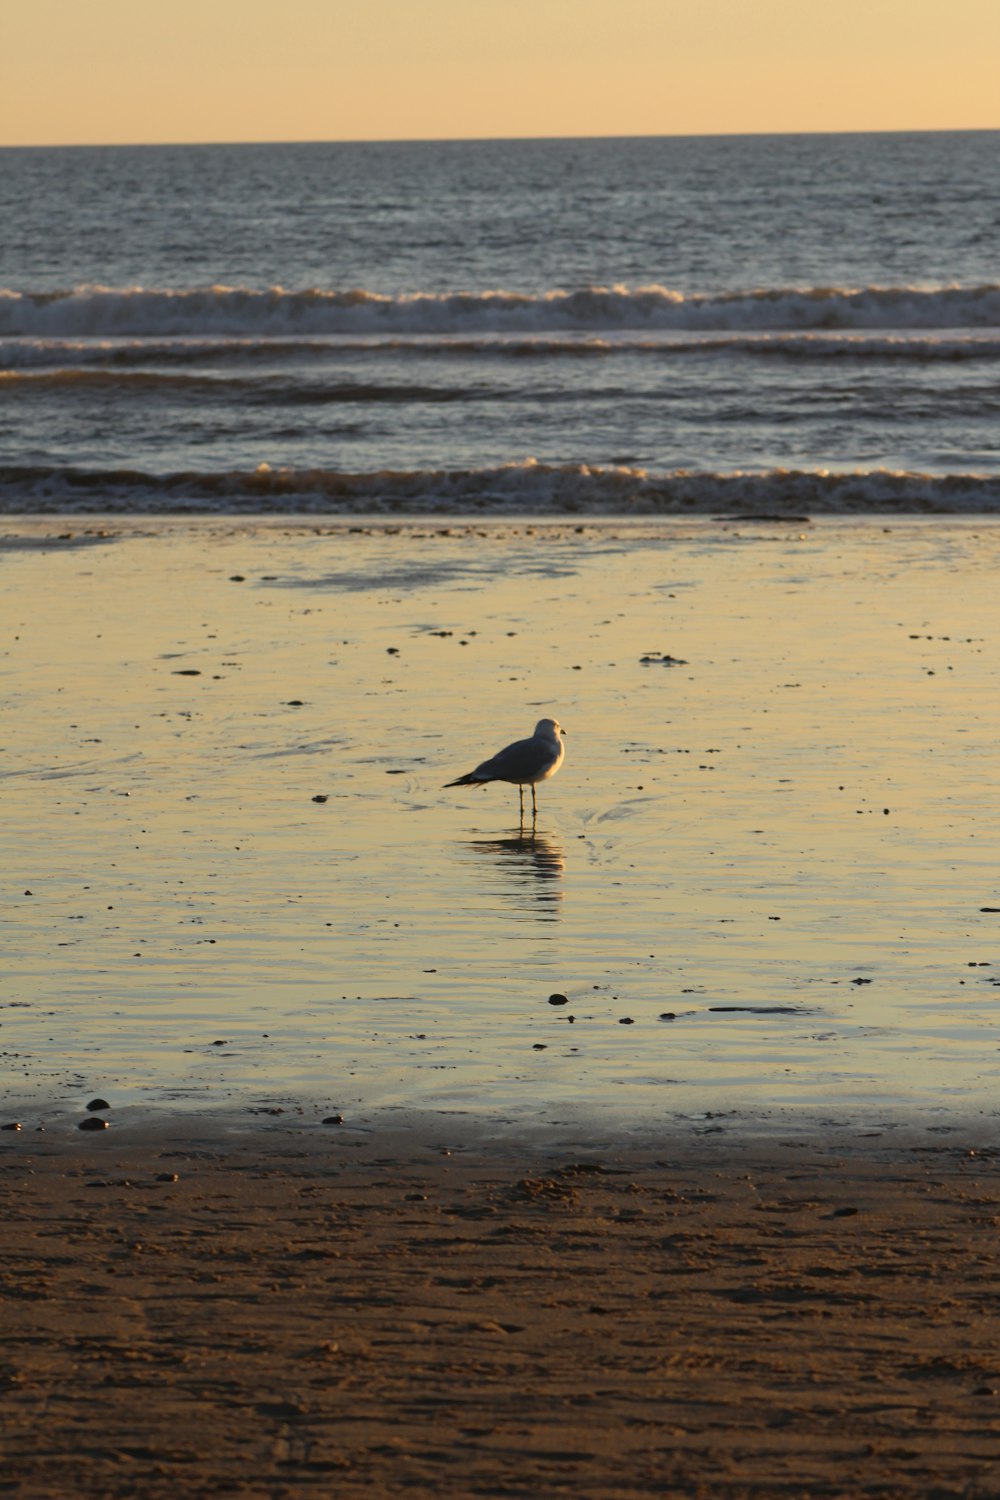 a seagull standing on the beach at sunset